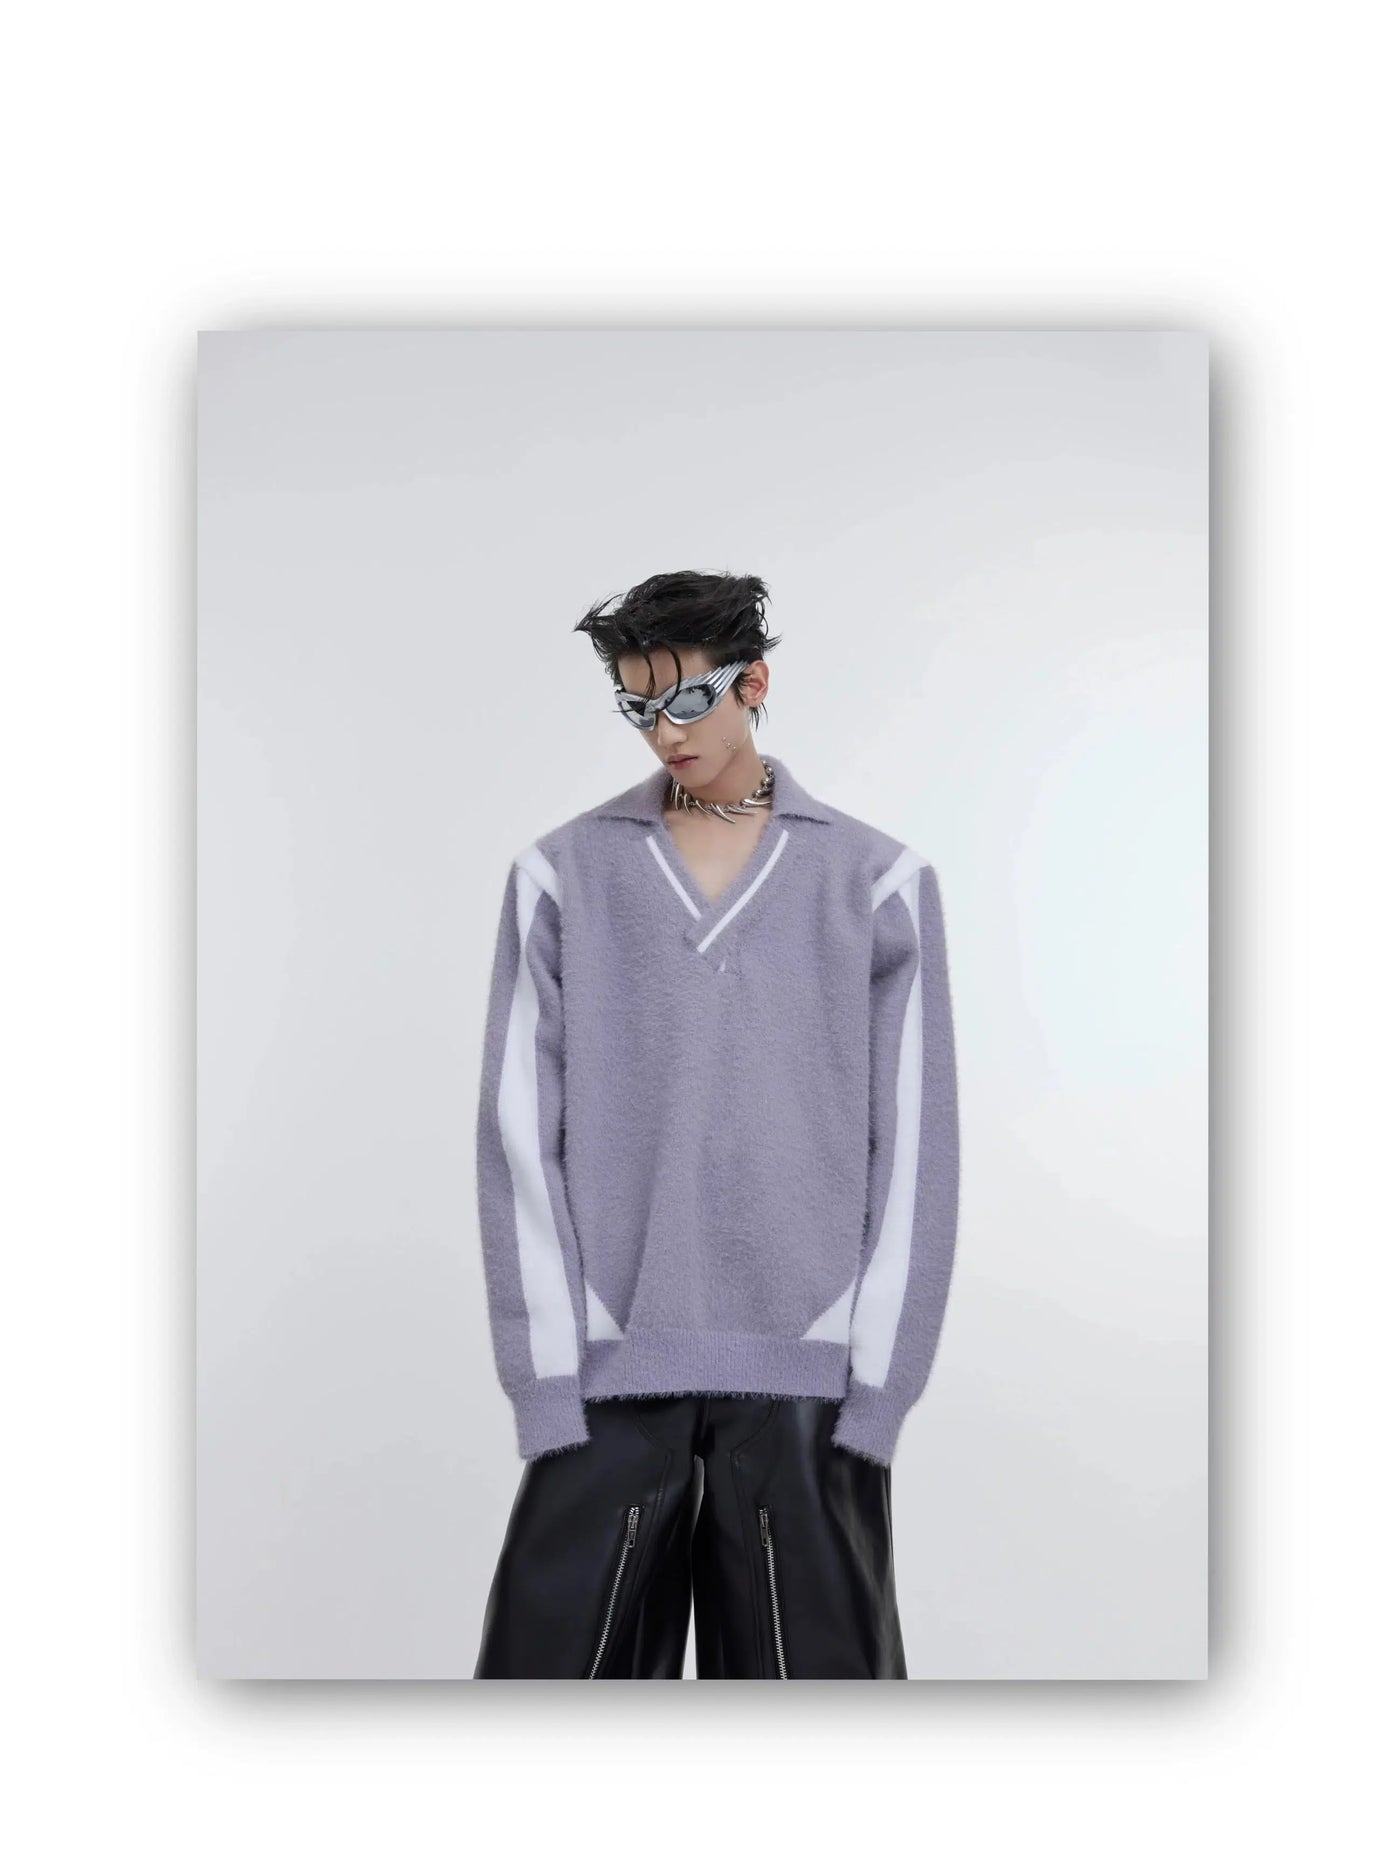 Mohair Contrast Lines Sweater Korean Street Fashion Sweater By Argue Culture Shop Online at OH Vault